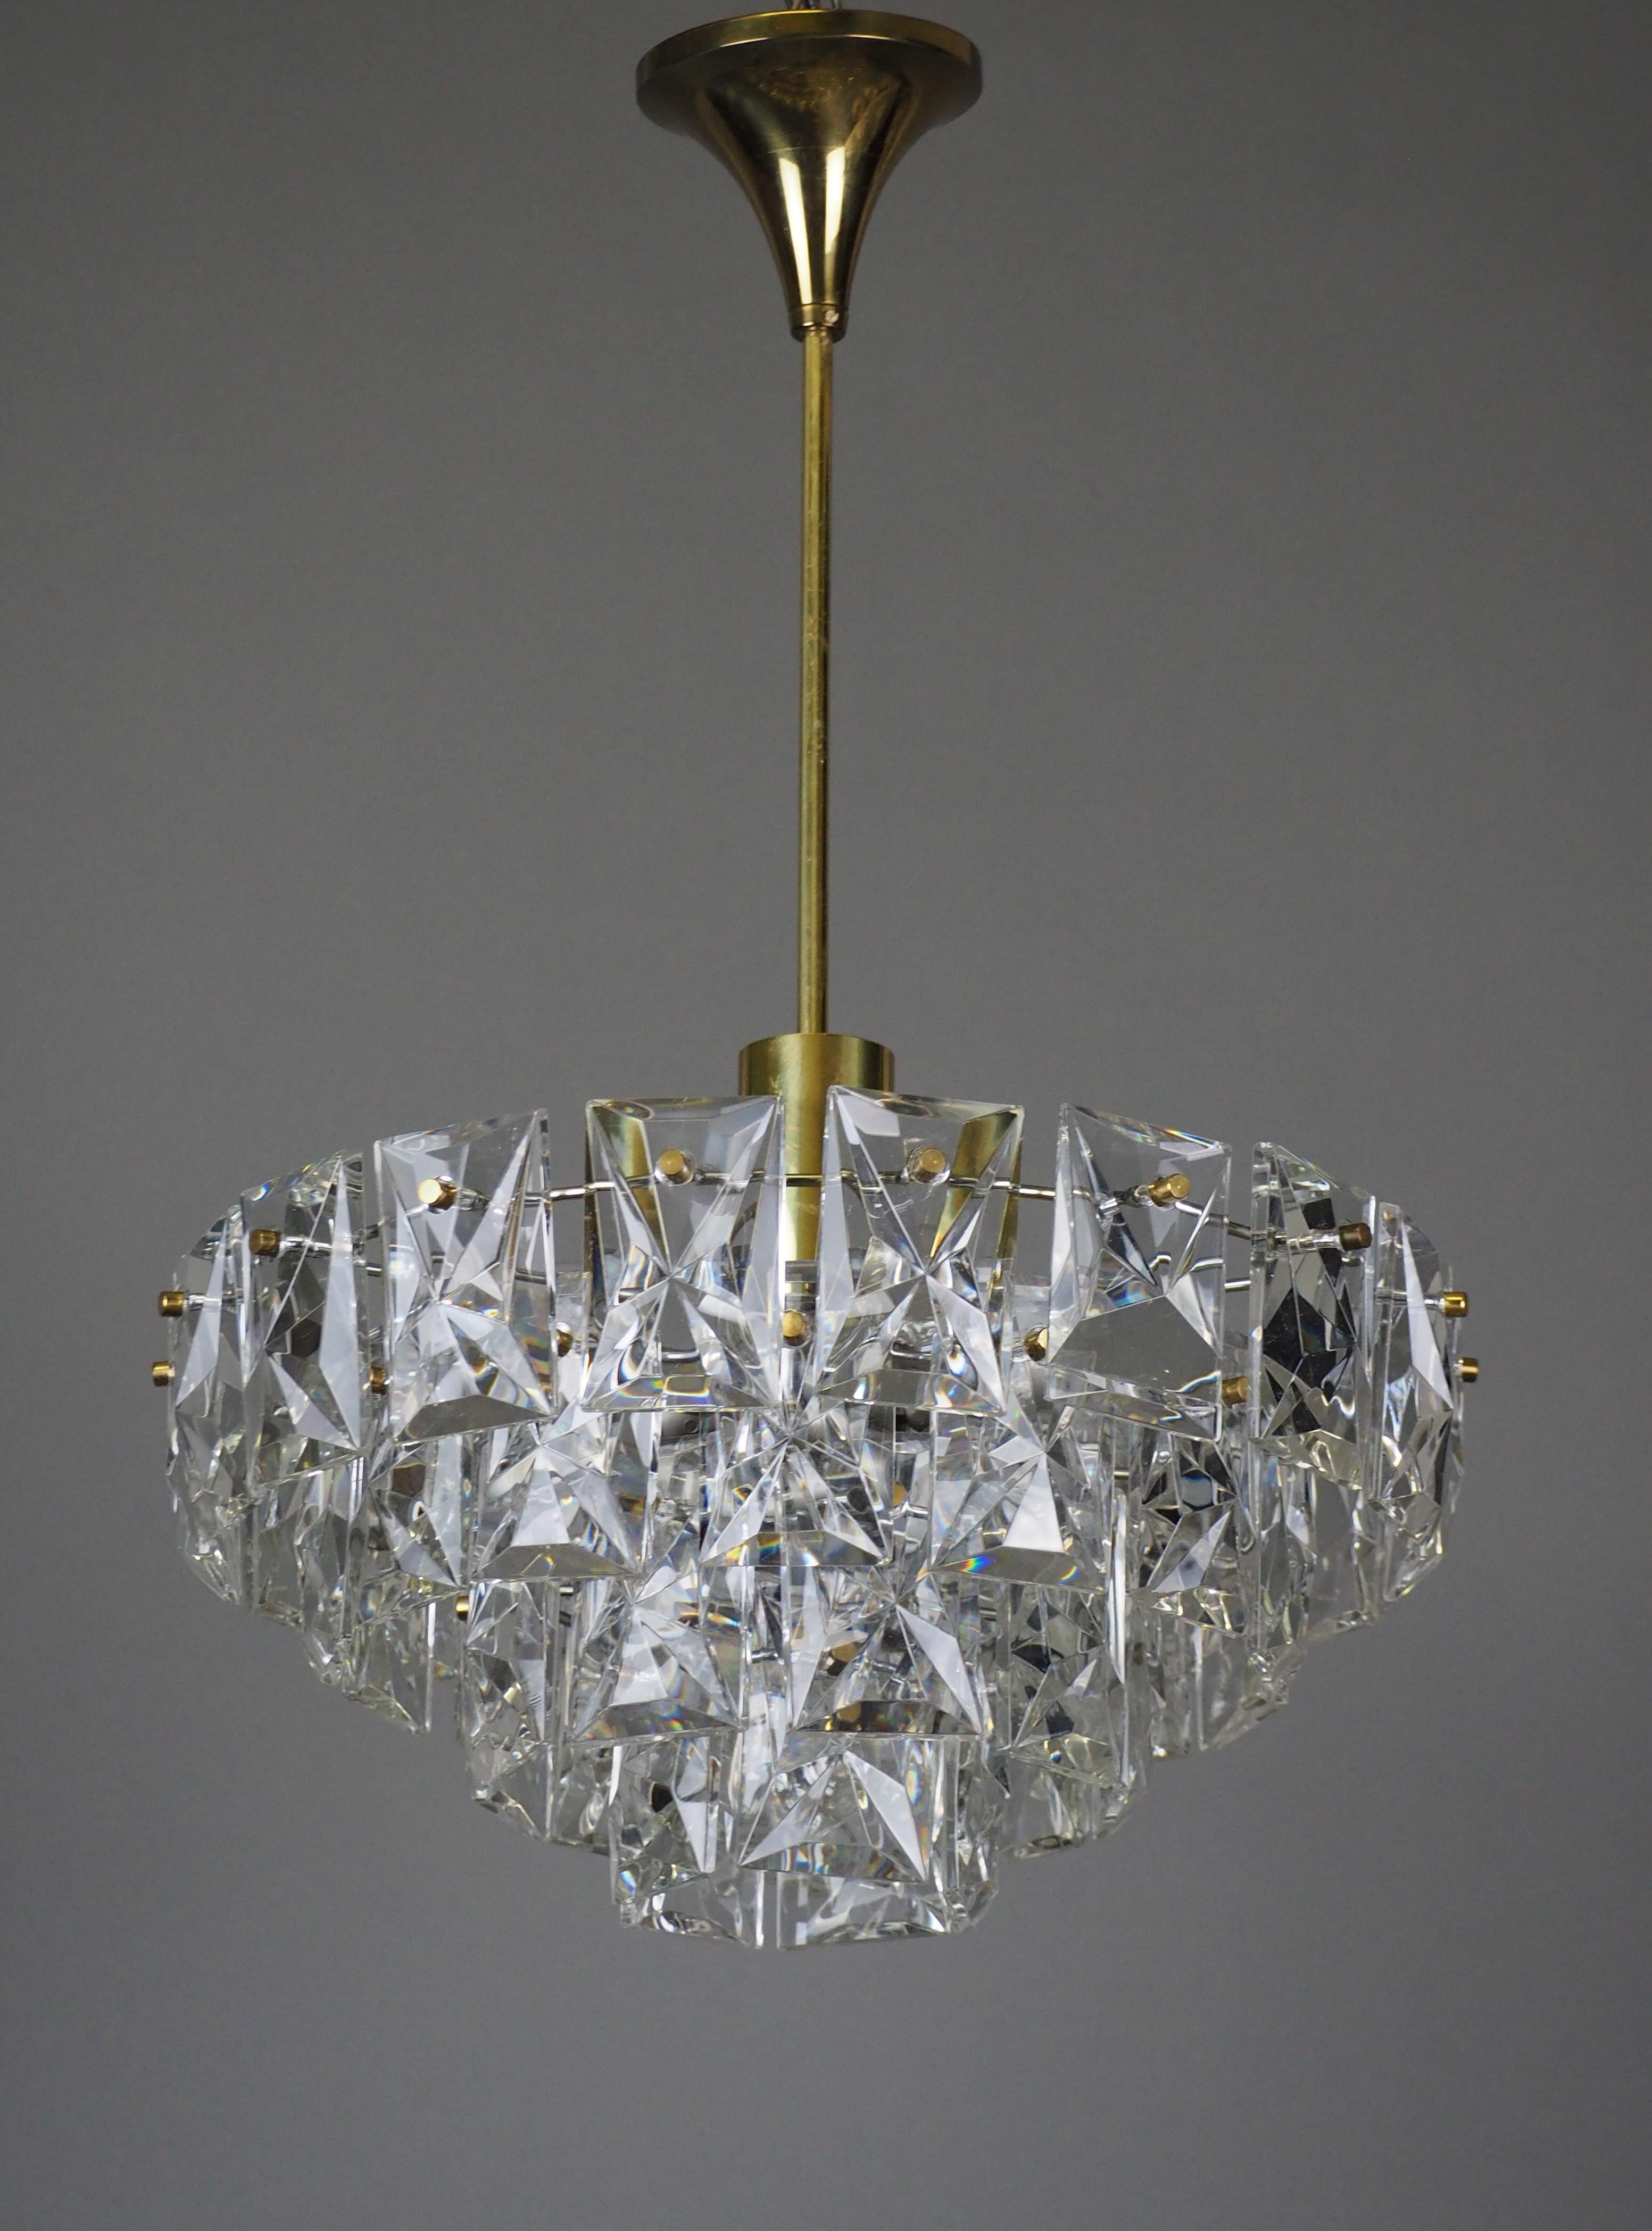 A beautiful Mid-Century Modern ten-light chandelier by Kinkeldey, Germany, circa 1960s.
High quality four tier gilt brass frame and metal frame with decorated with heavy crystal elements.
Socket: 9x e14 and 1 x e27 for standard screw bulbs.